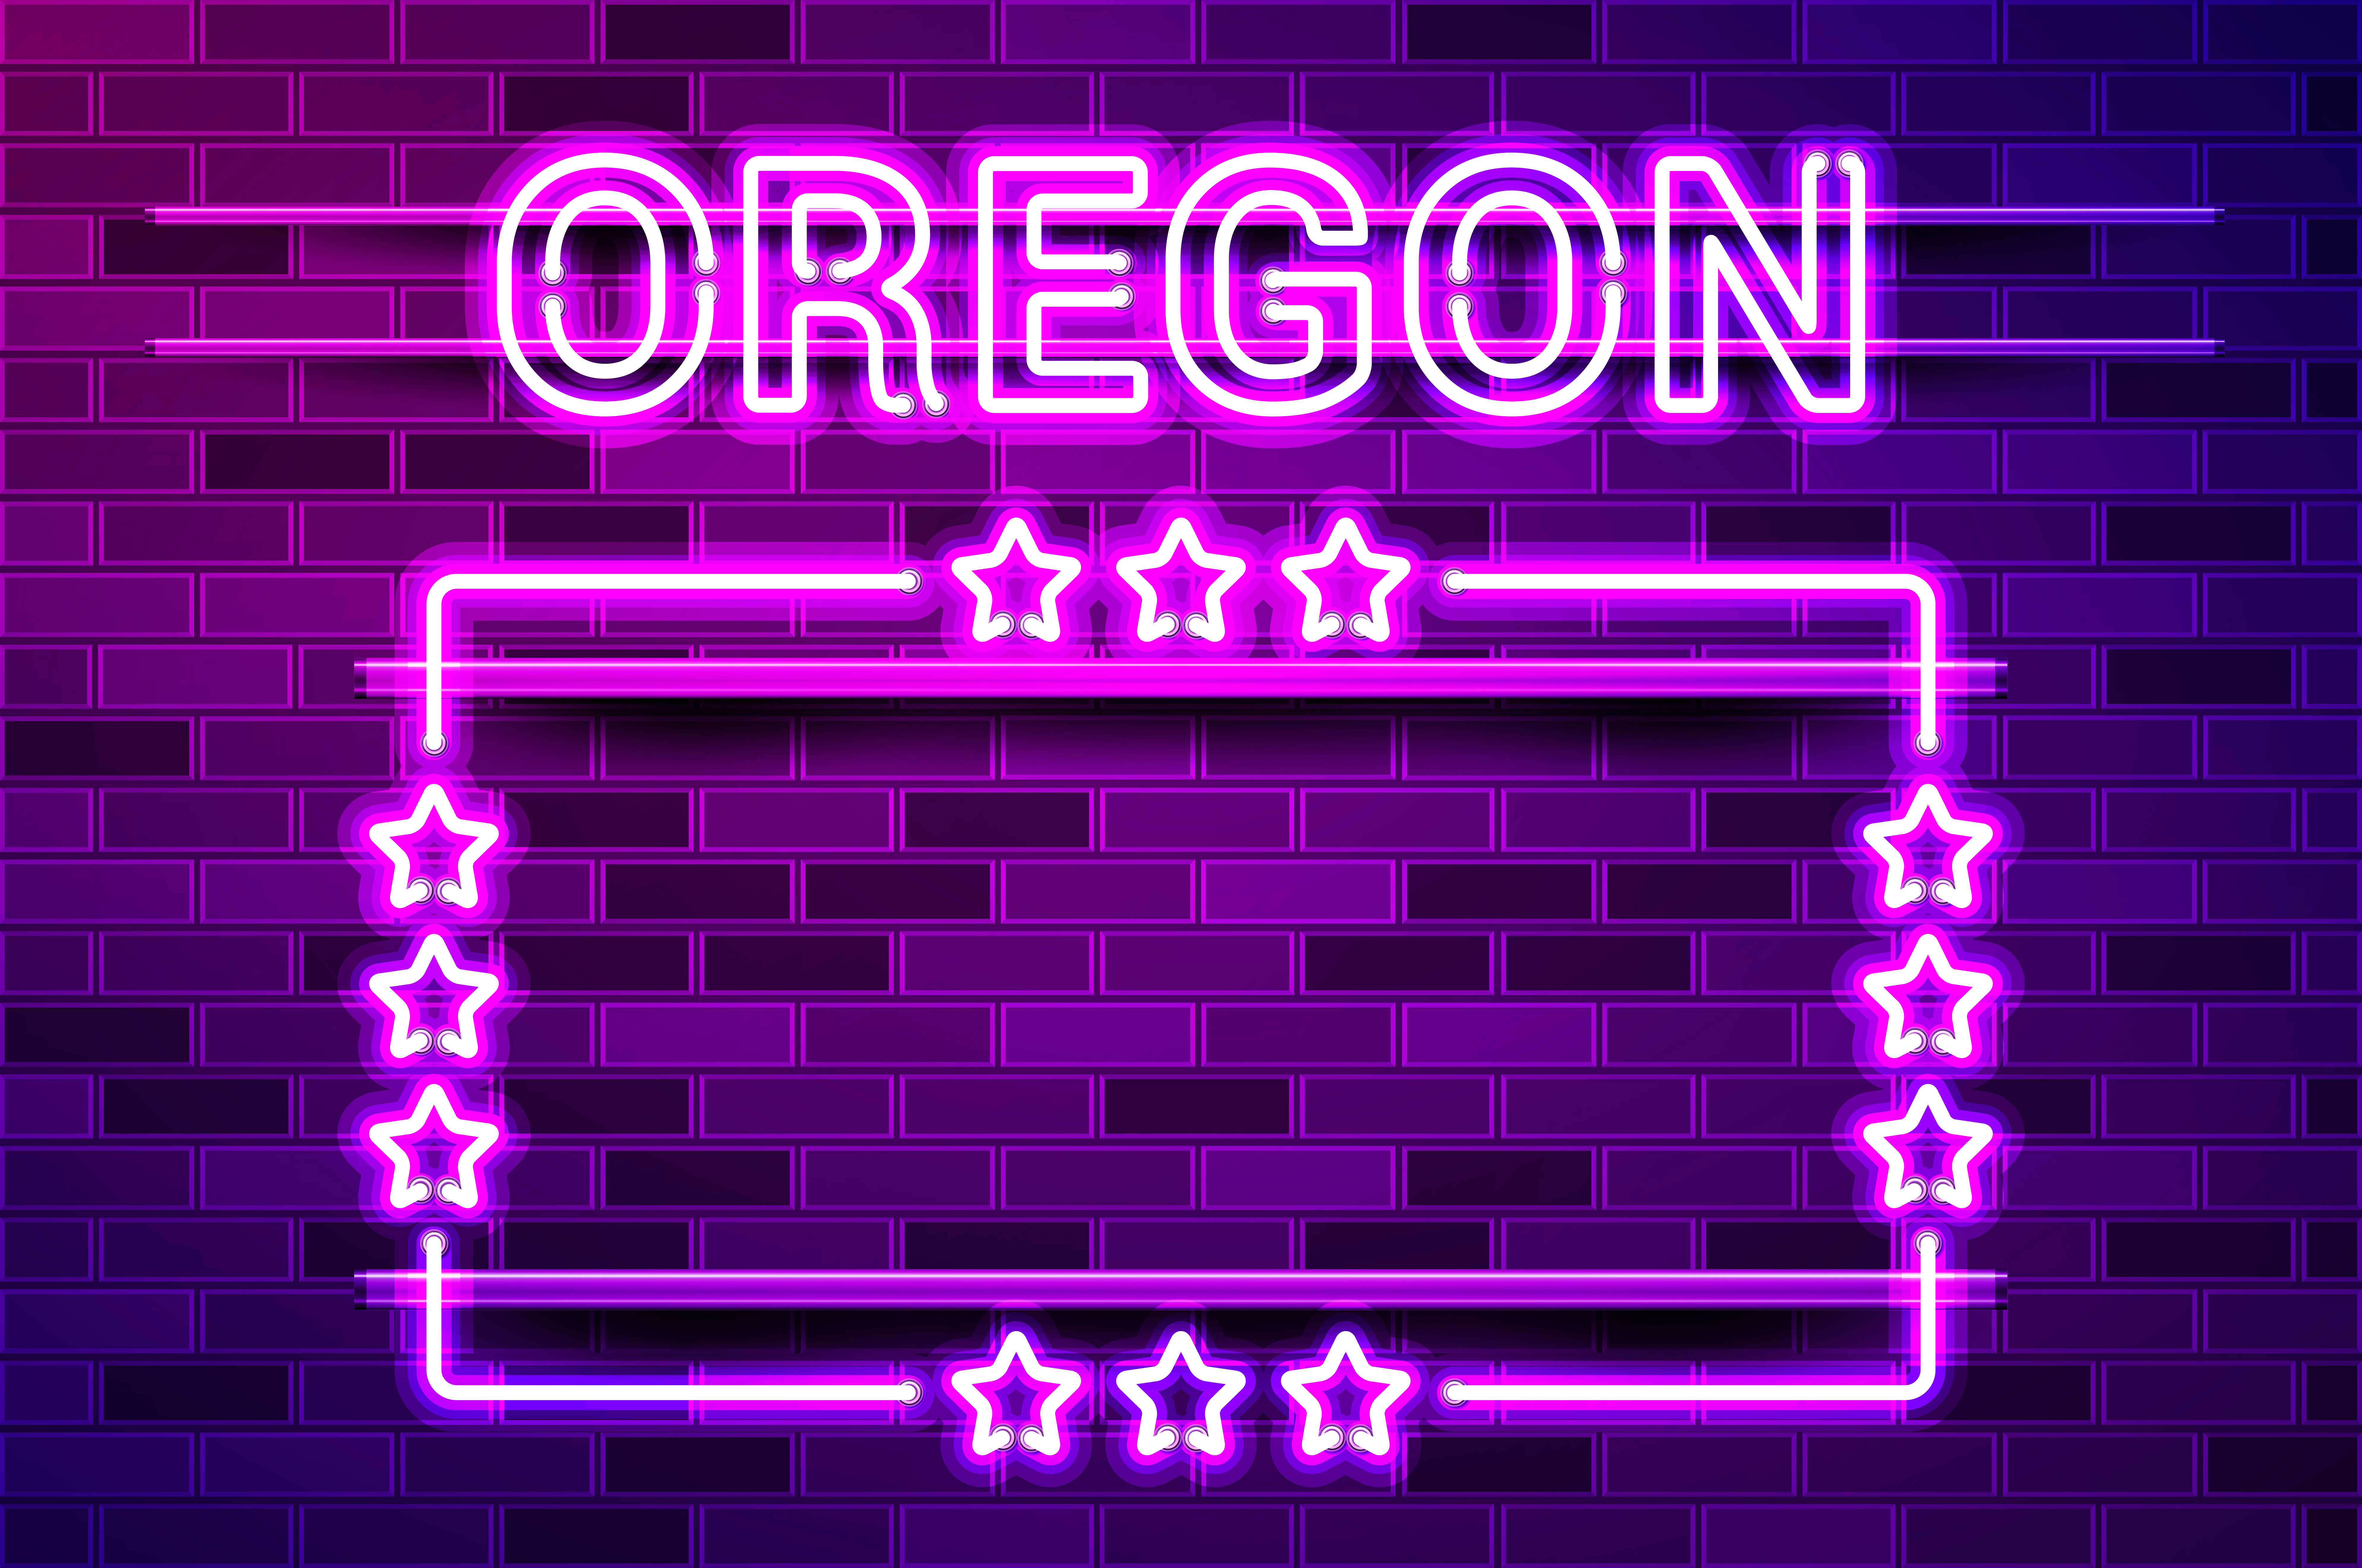 Oregon US State glowing purple neon lettering and a rectangular frame with stars. Realistic vector illustration. Purple brick wall, violet glow, metal holders.. Oregon US State glowing purple neon lettering and a rectangular frame with stars